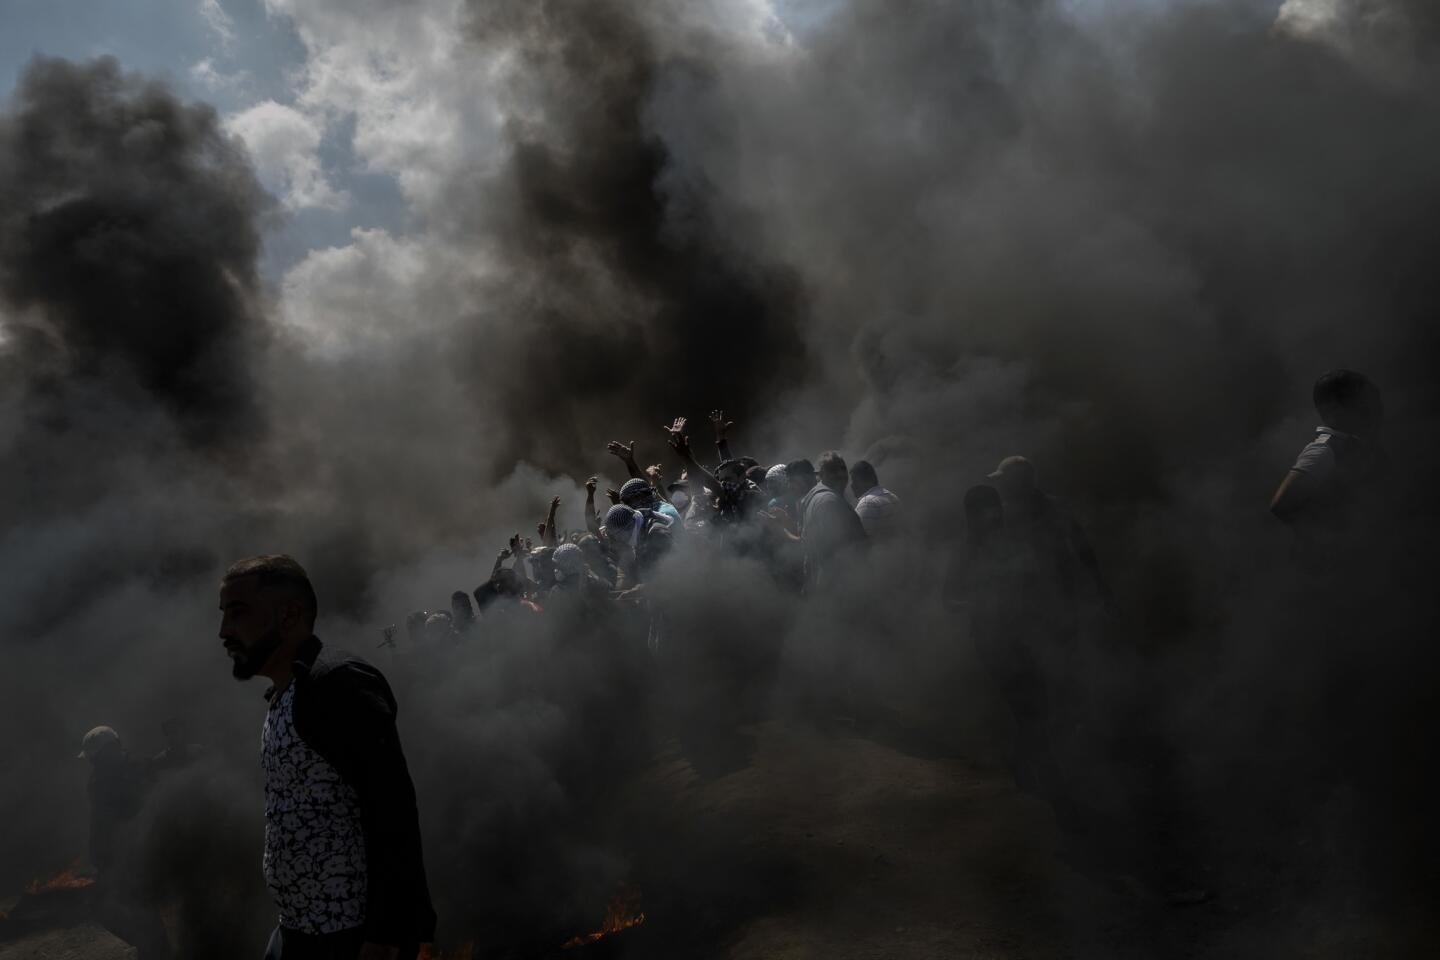 Gaza protests turn deadly